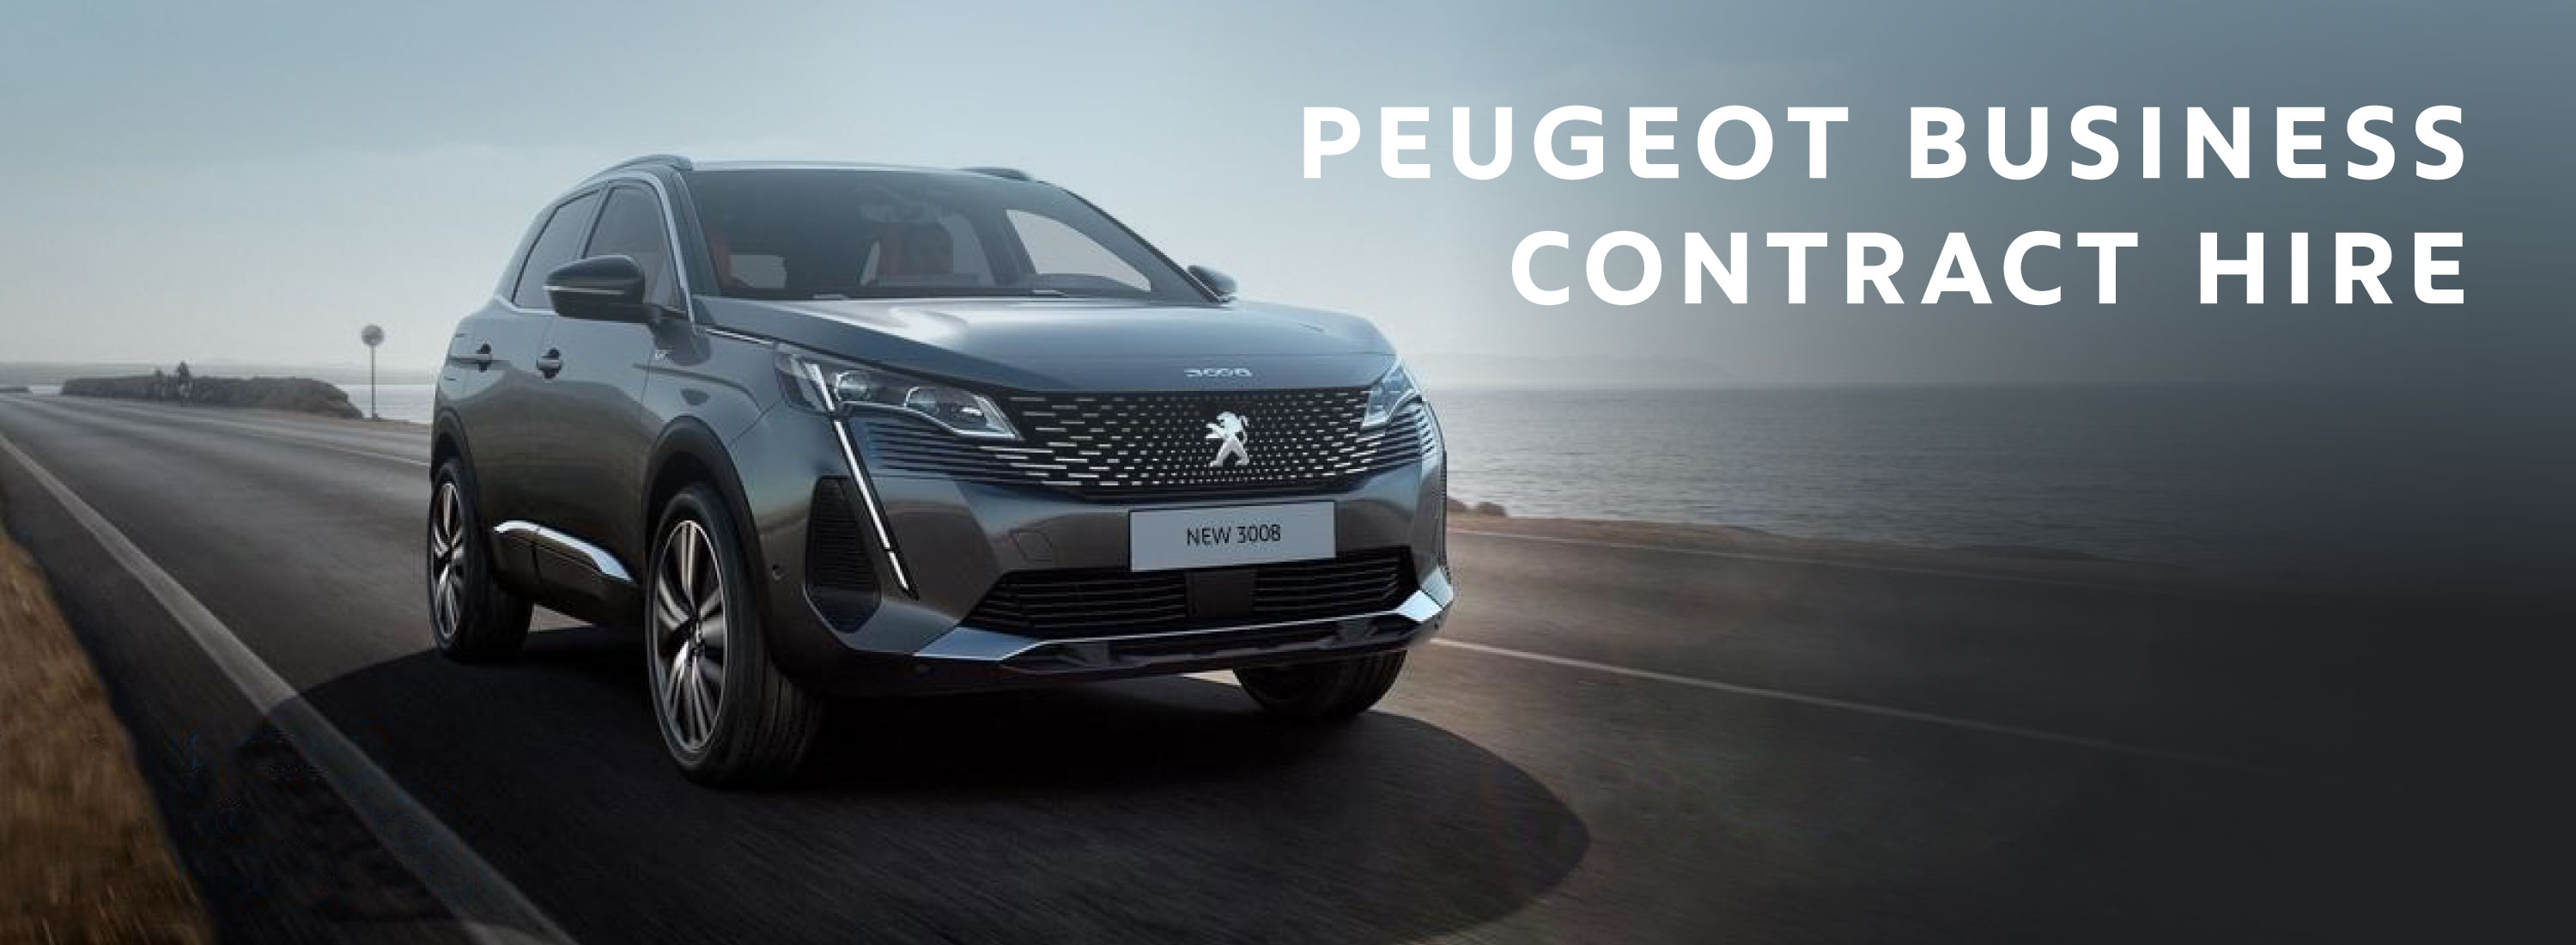 Peugeot Business Contract Hire